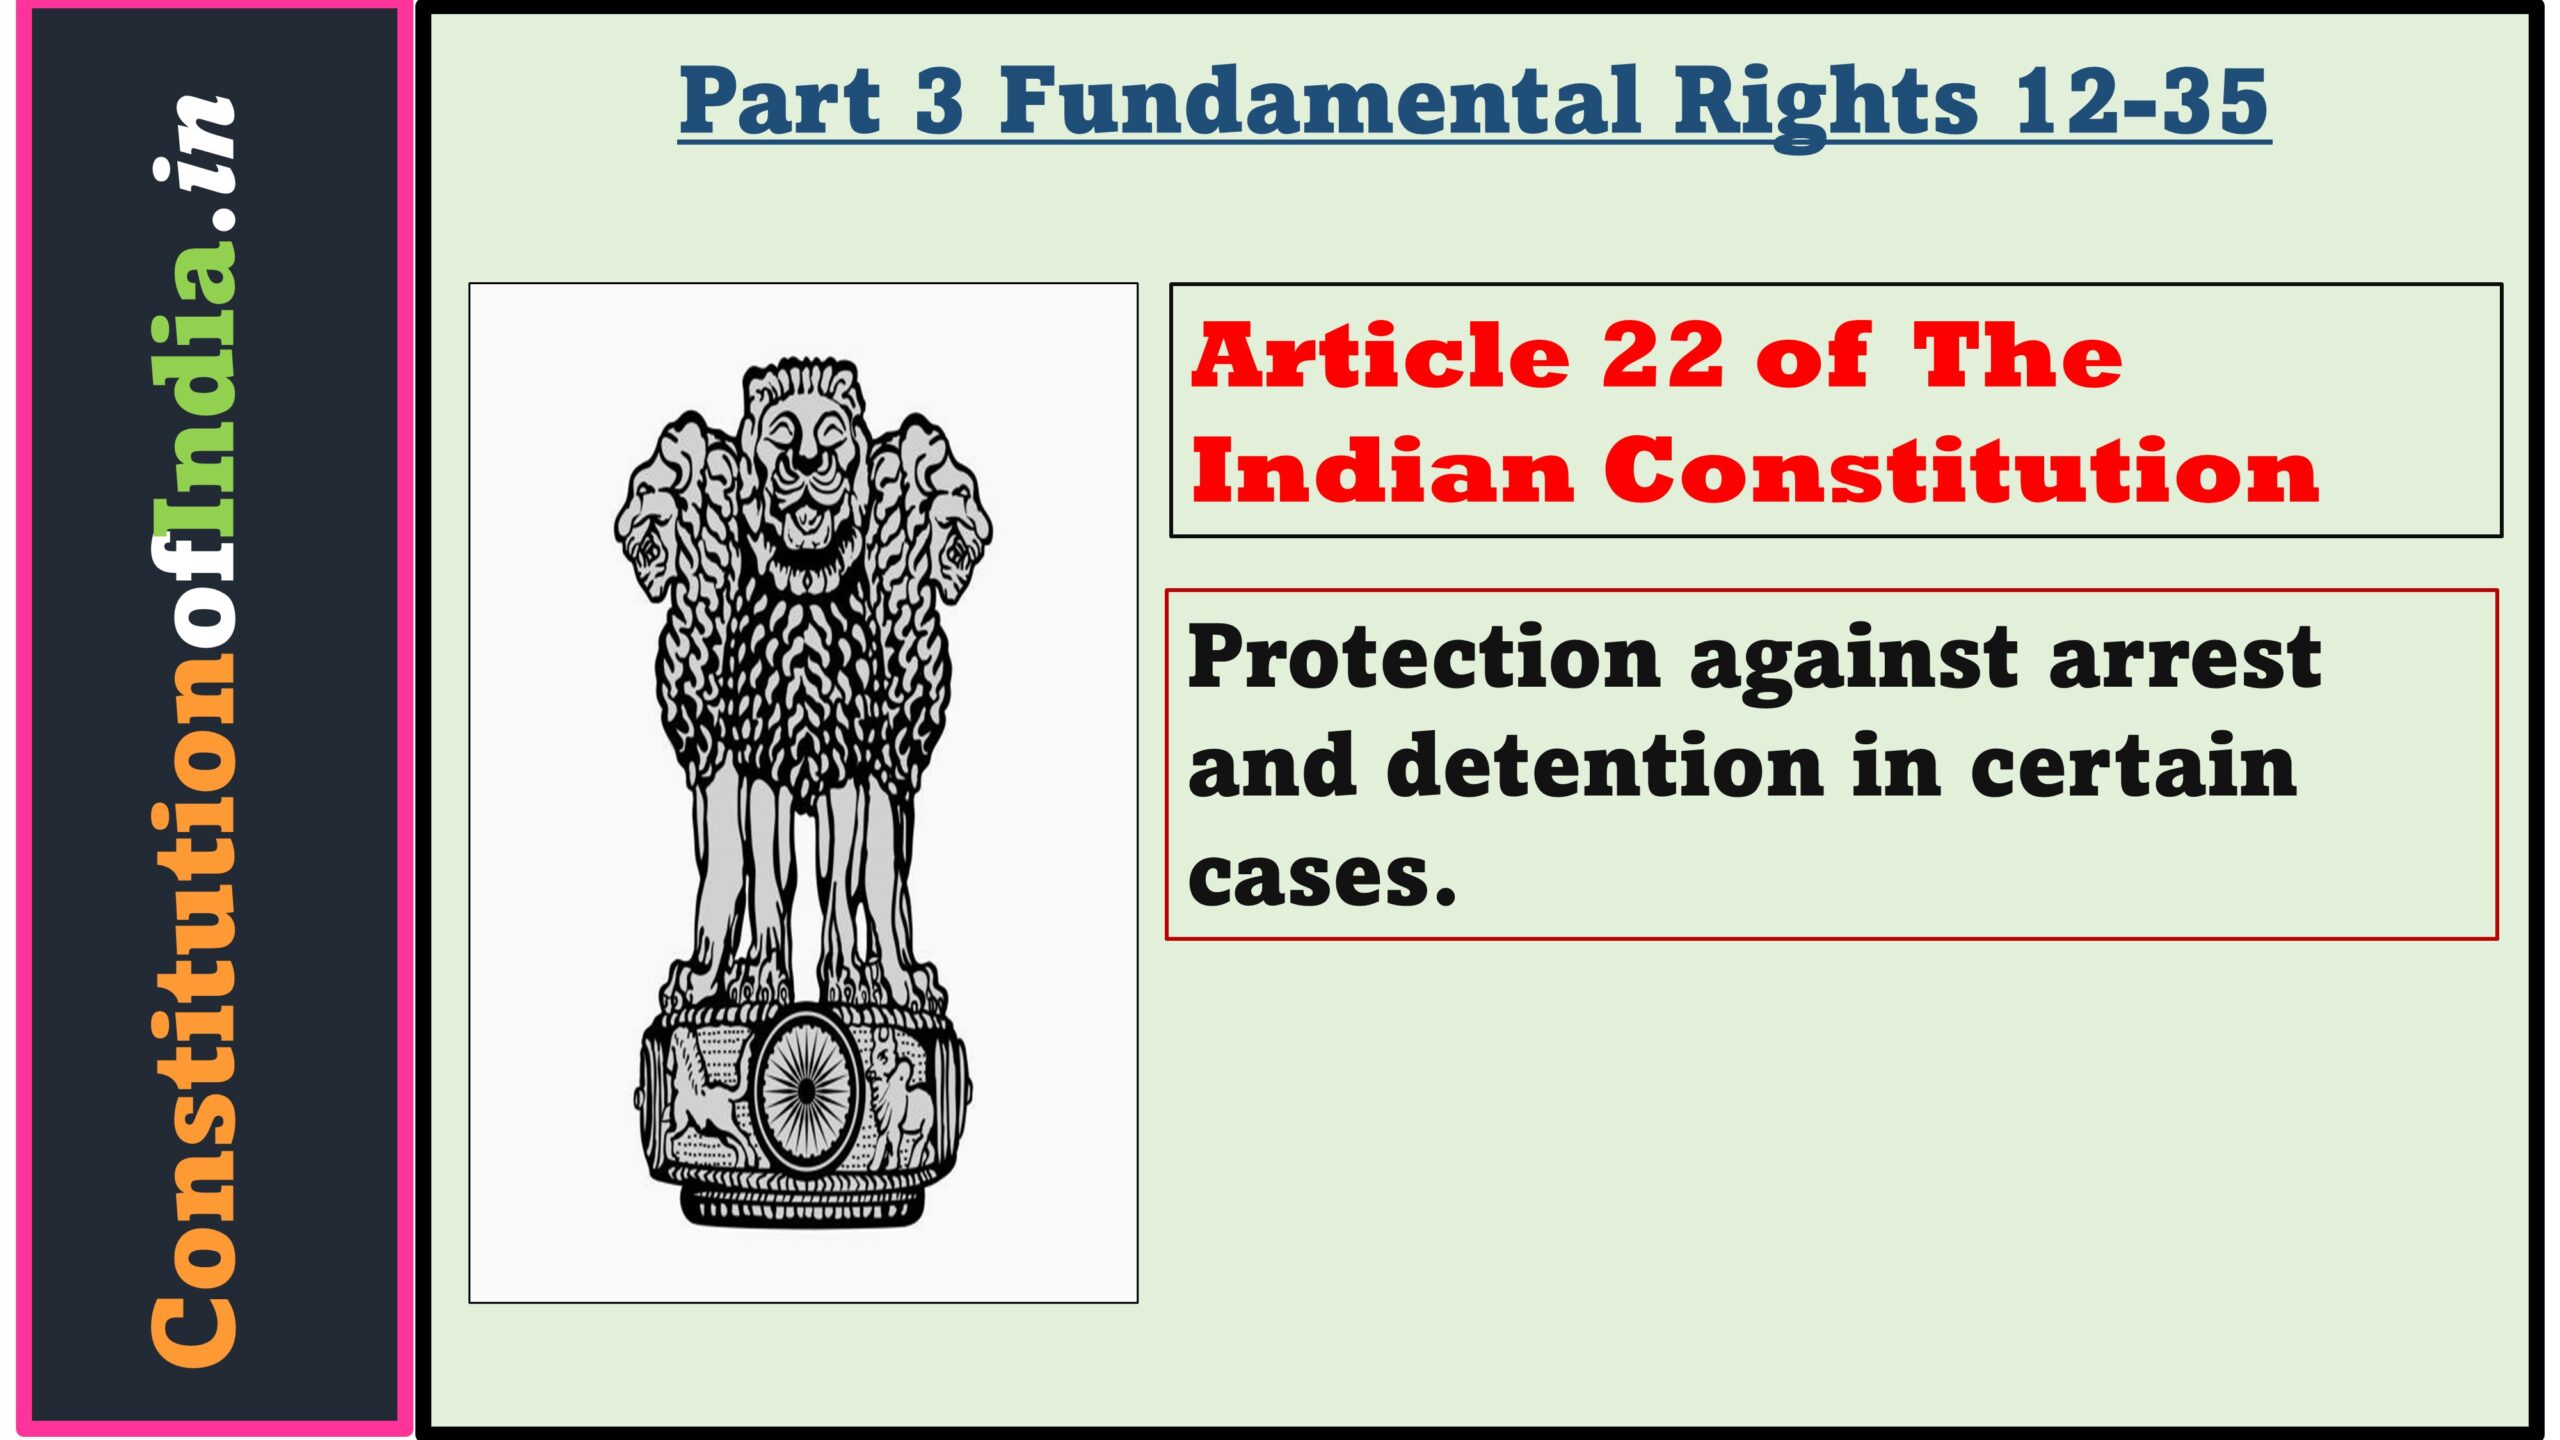 Article 22 of Indian Constitution: Protection of life and personal liberty.